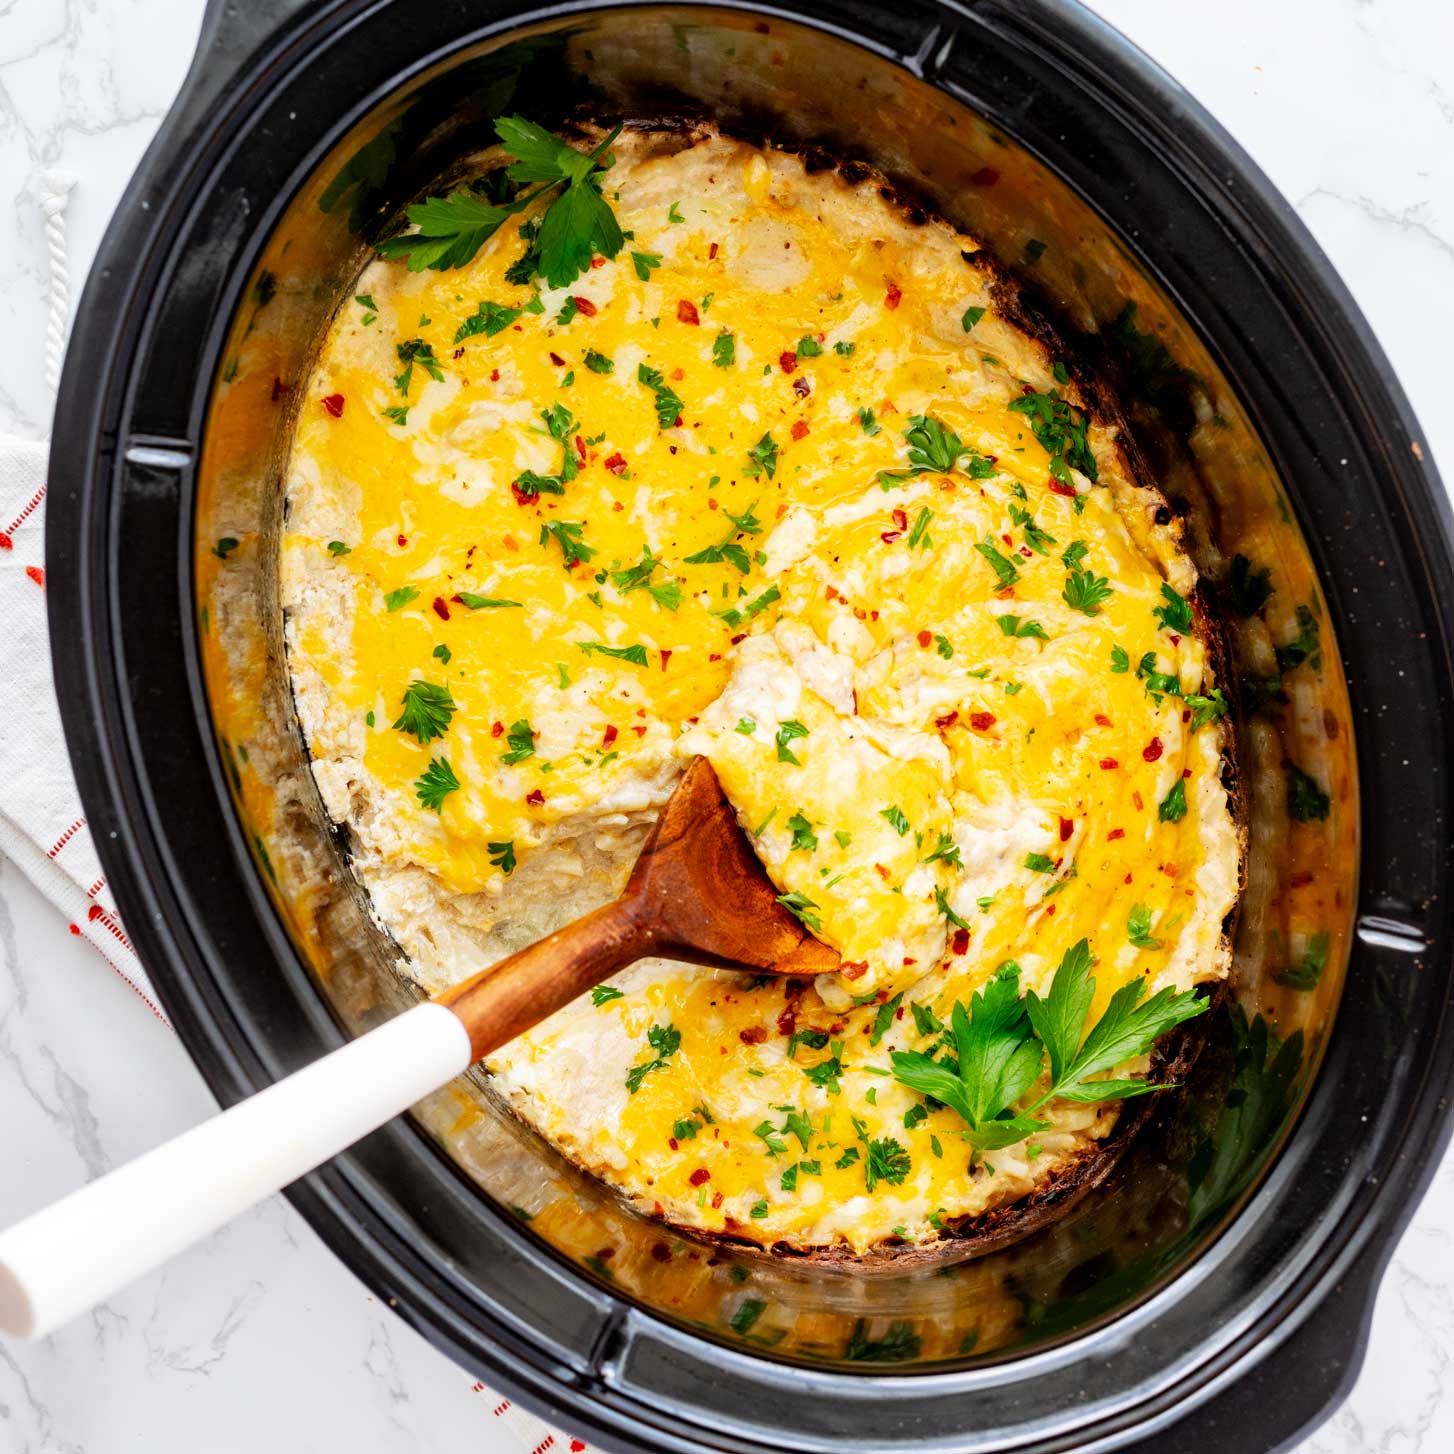 Crockpot Cheesy Hash Brown Casserole (without Soup) - Wendy Polisi